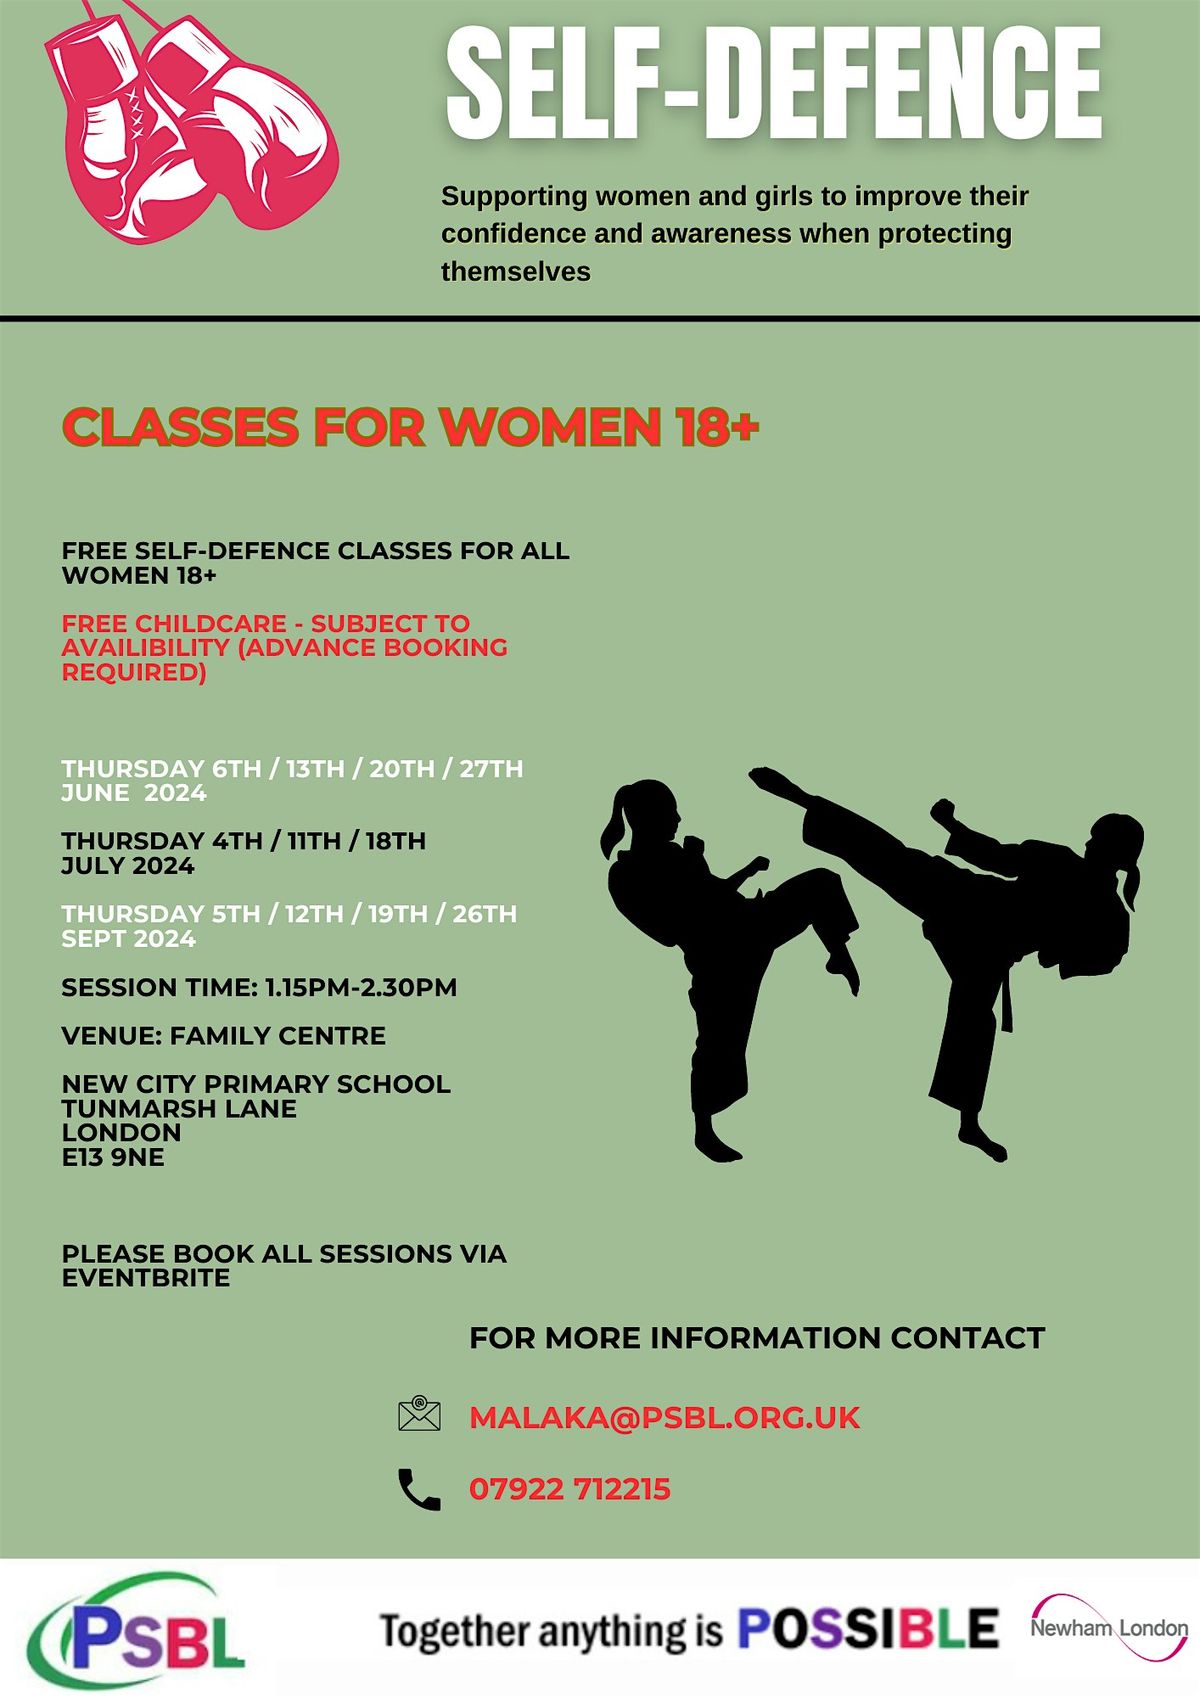 FREE self-defence classes